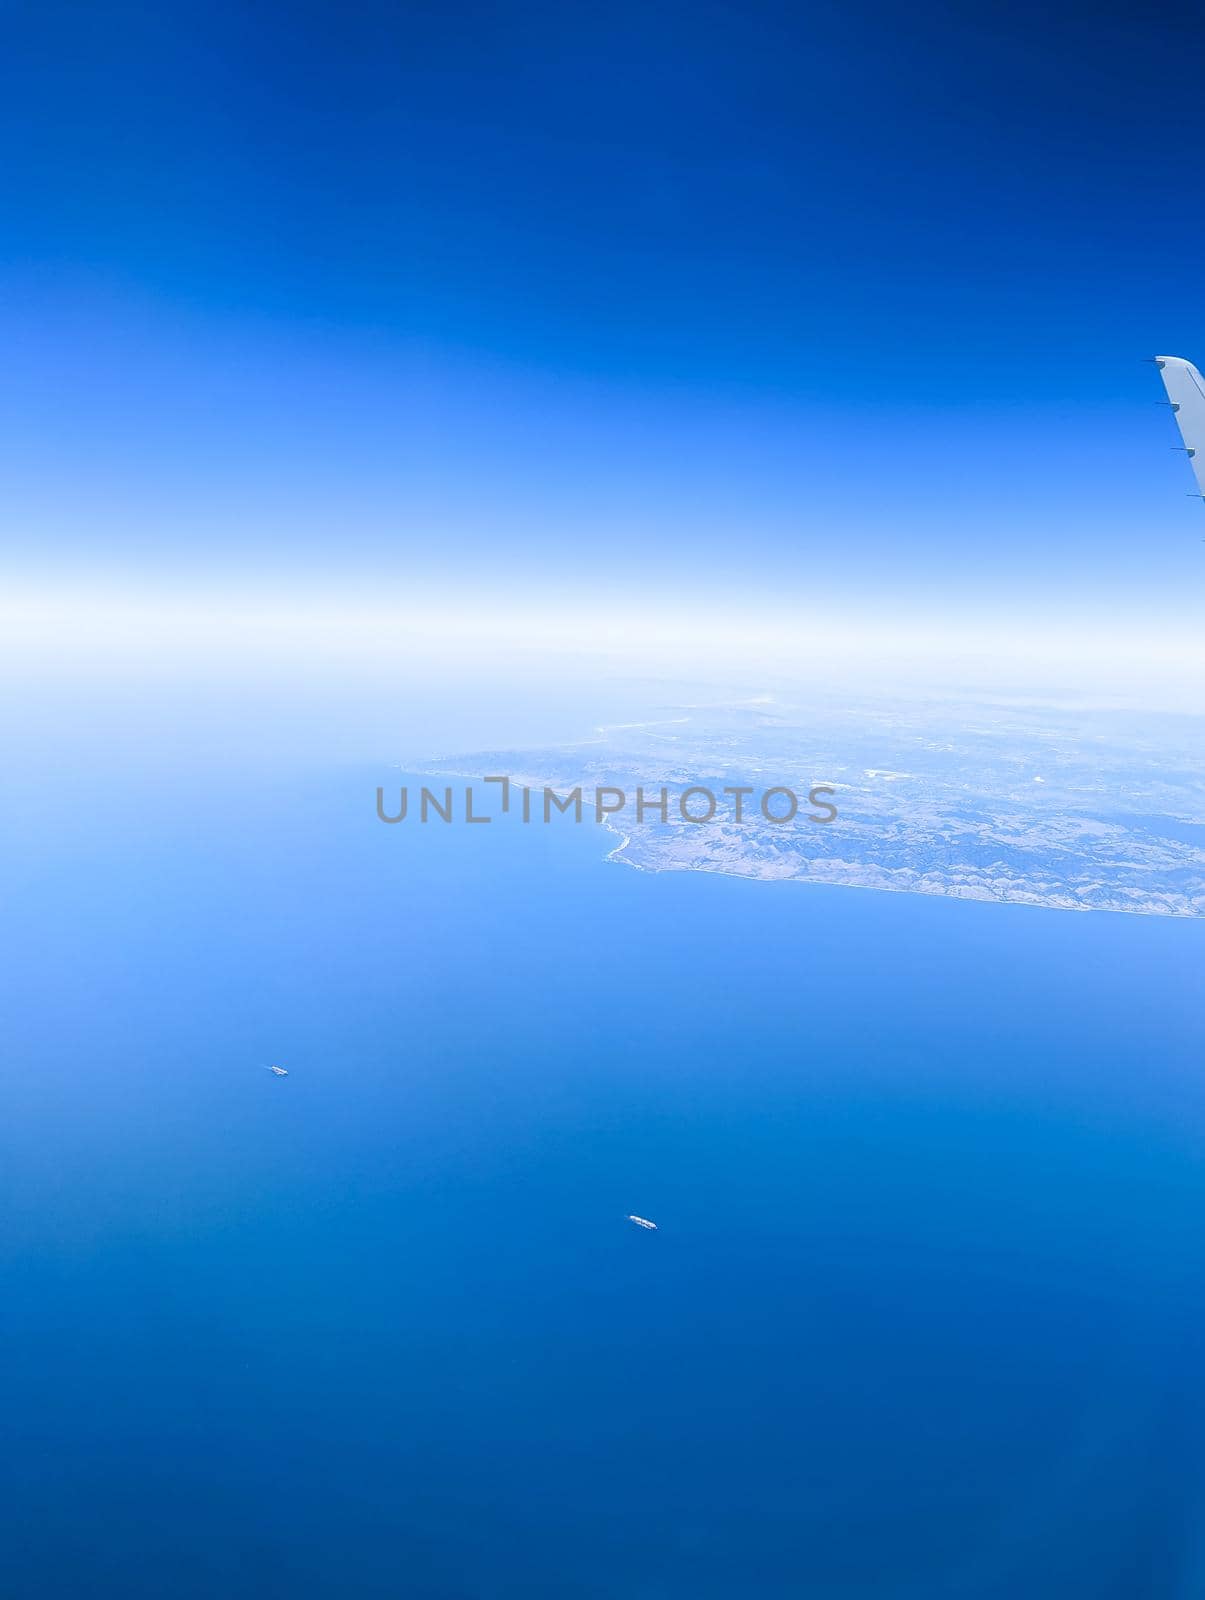 southern california coastline from an air plane by digidreamgrafix